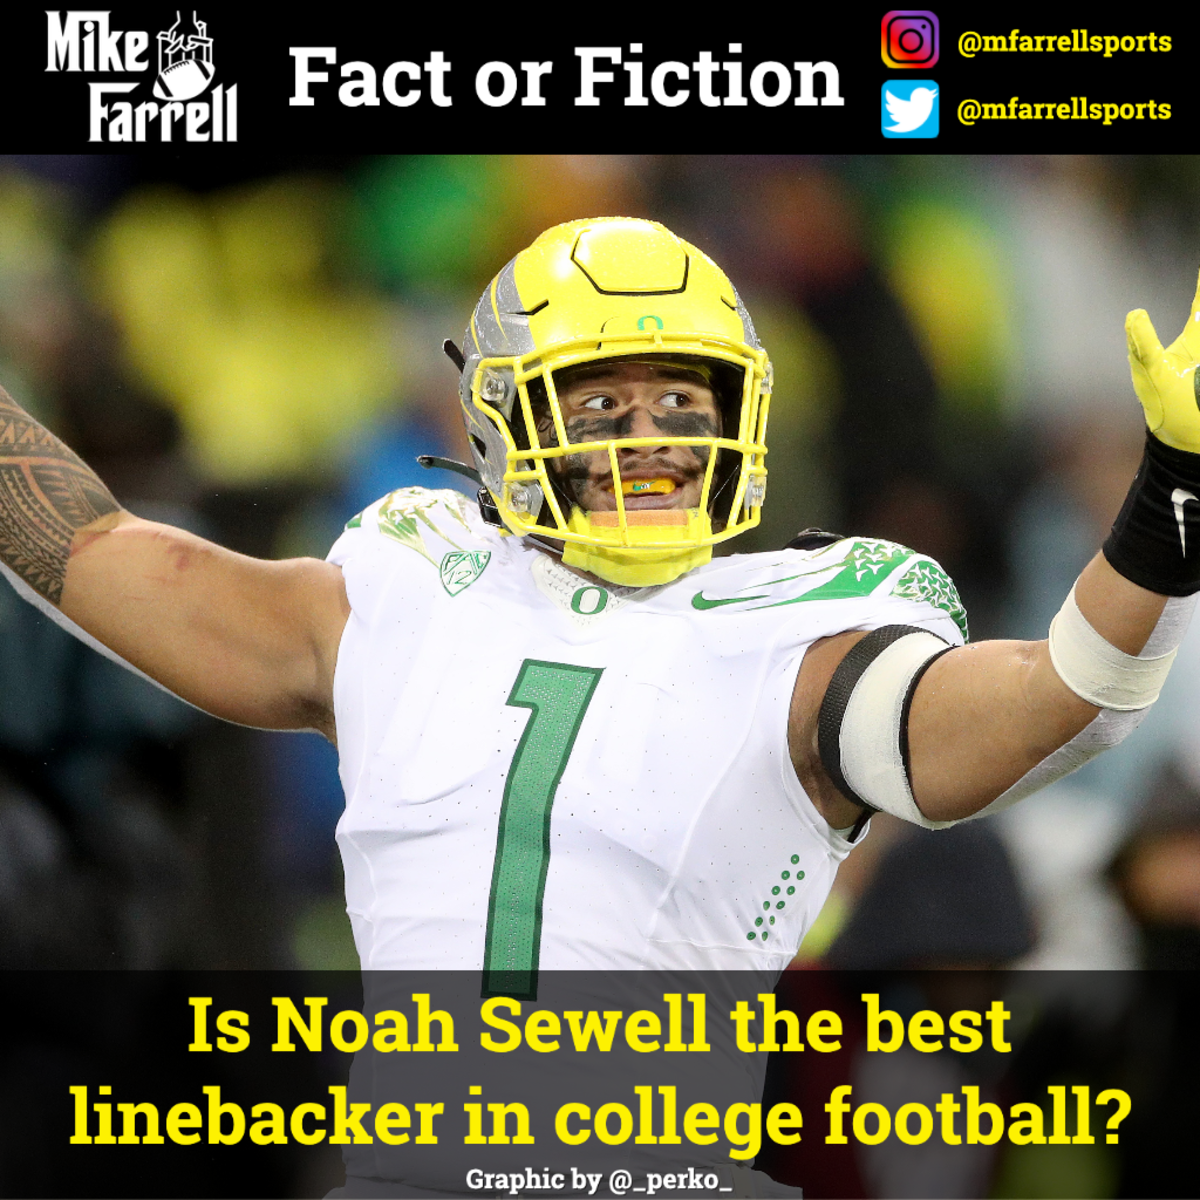 Fact or Fiction - Noah Sewell